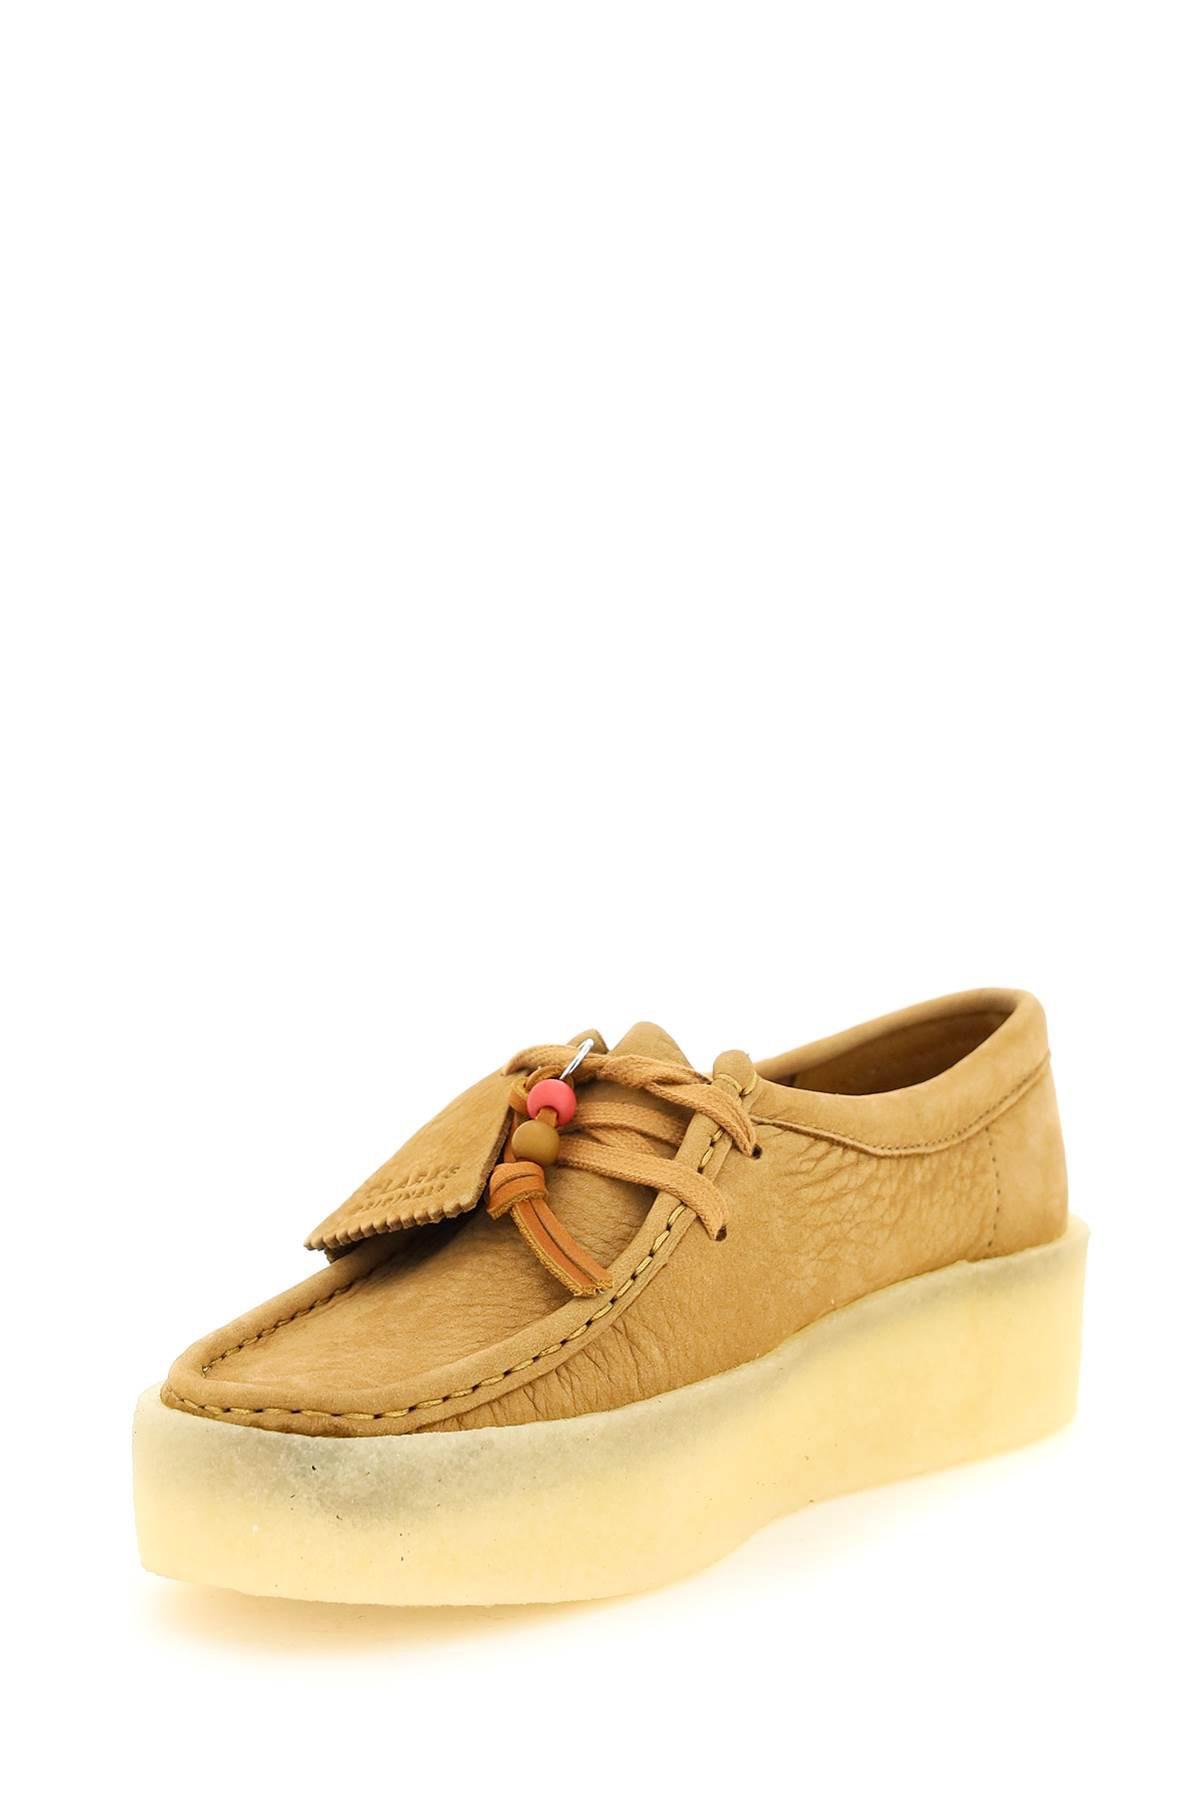 Womens Flats and flat shoes Clarks Flats and flat shoes Natural Clarks Leather Wallabee Cup Lace-up Shoes in Beige 